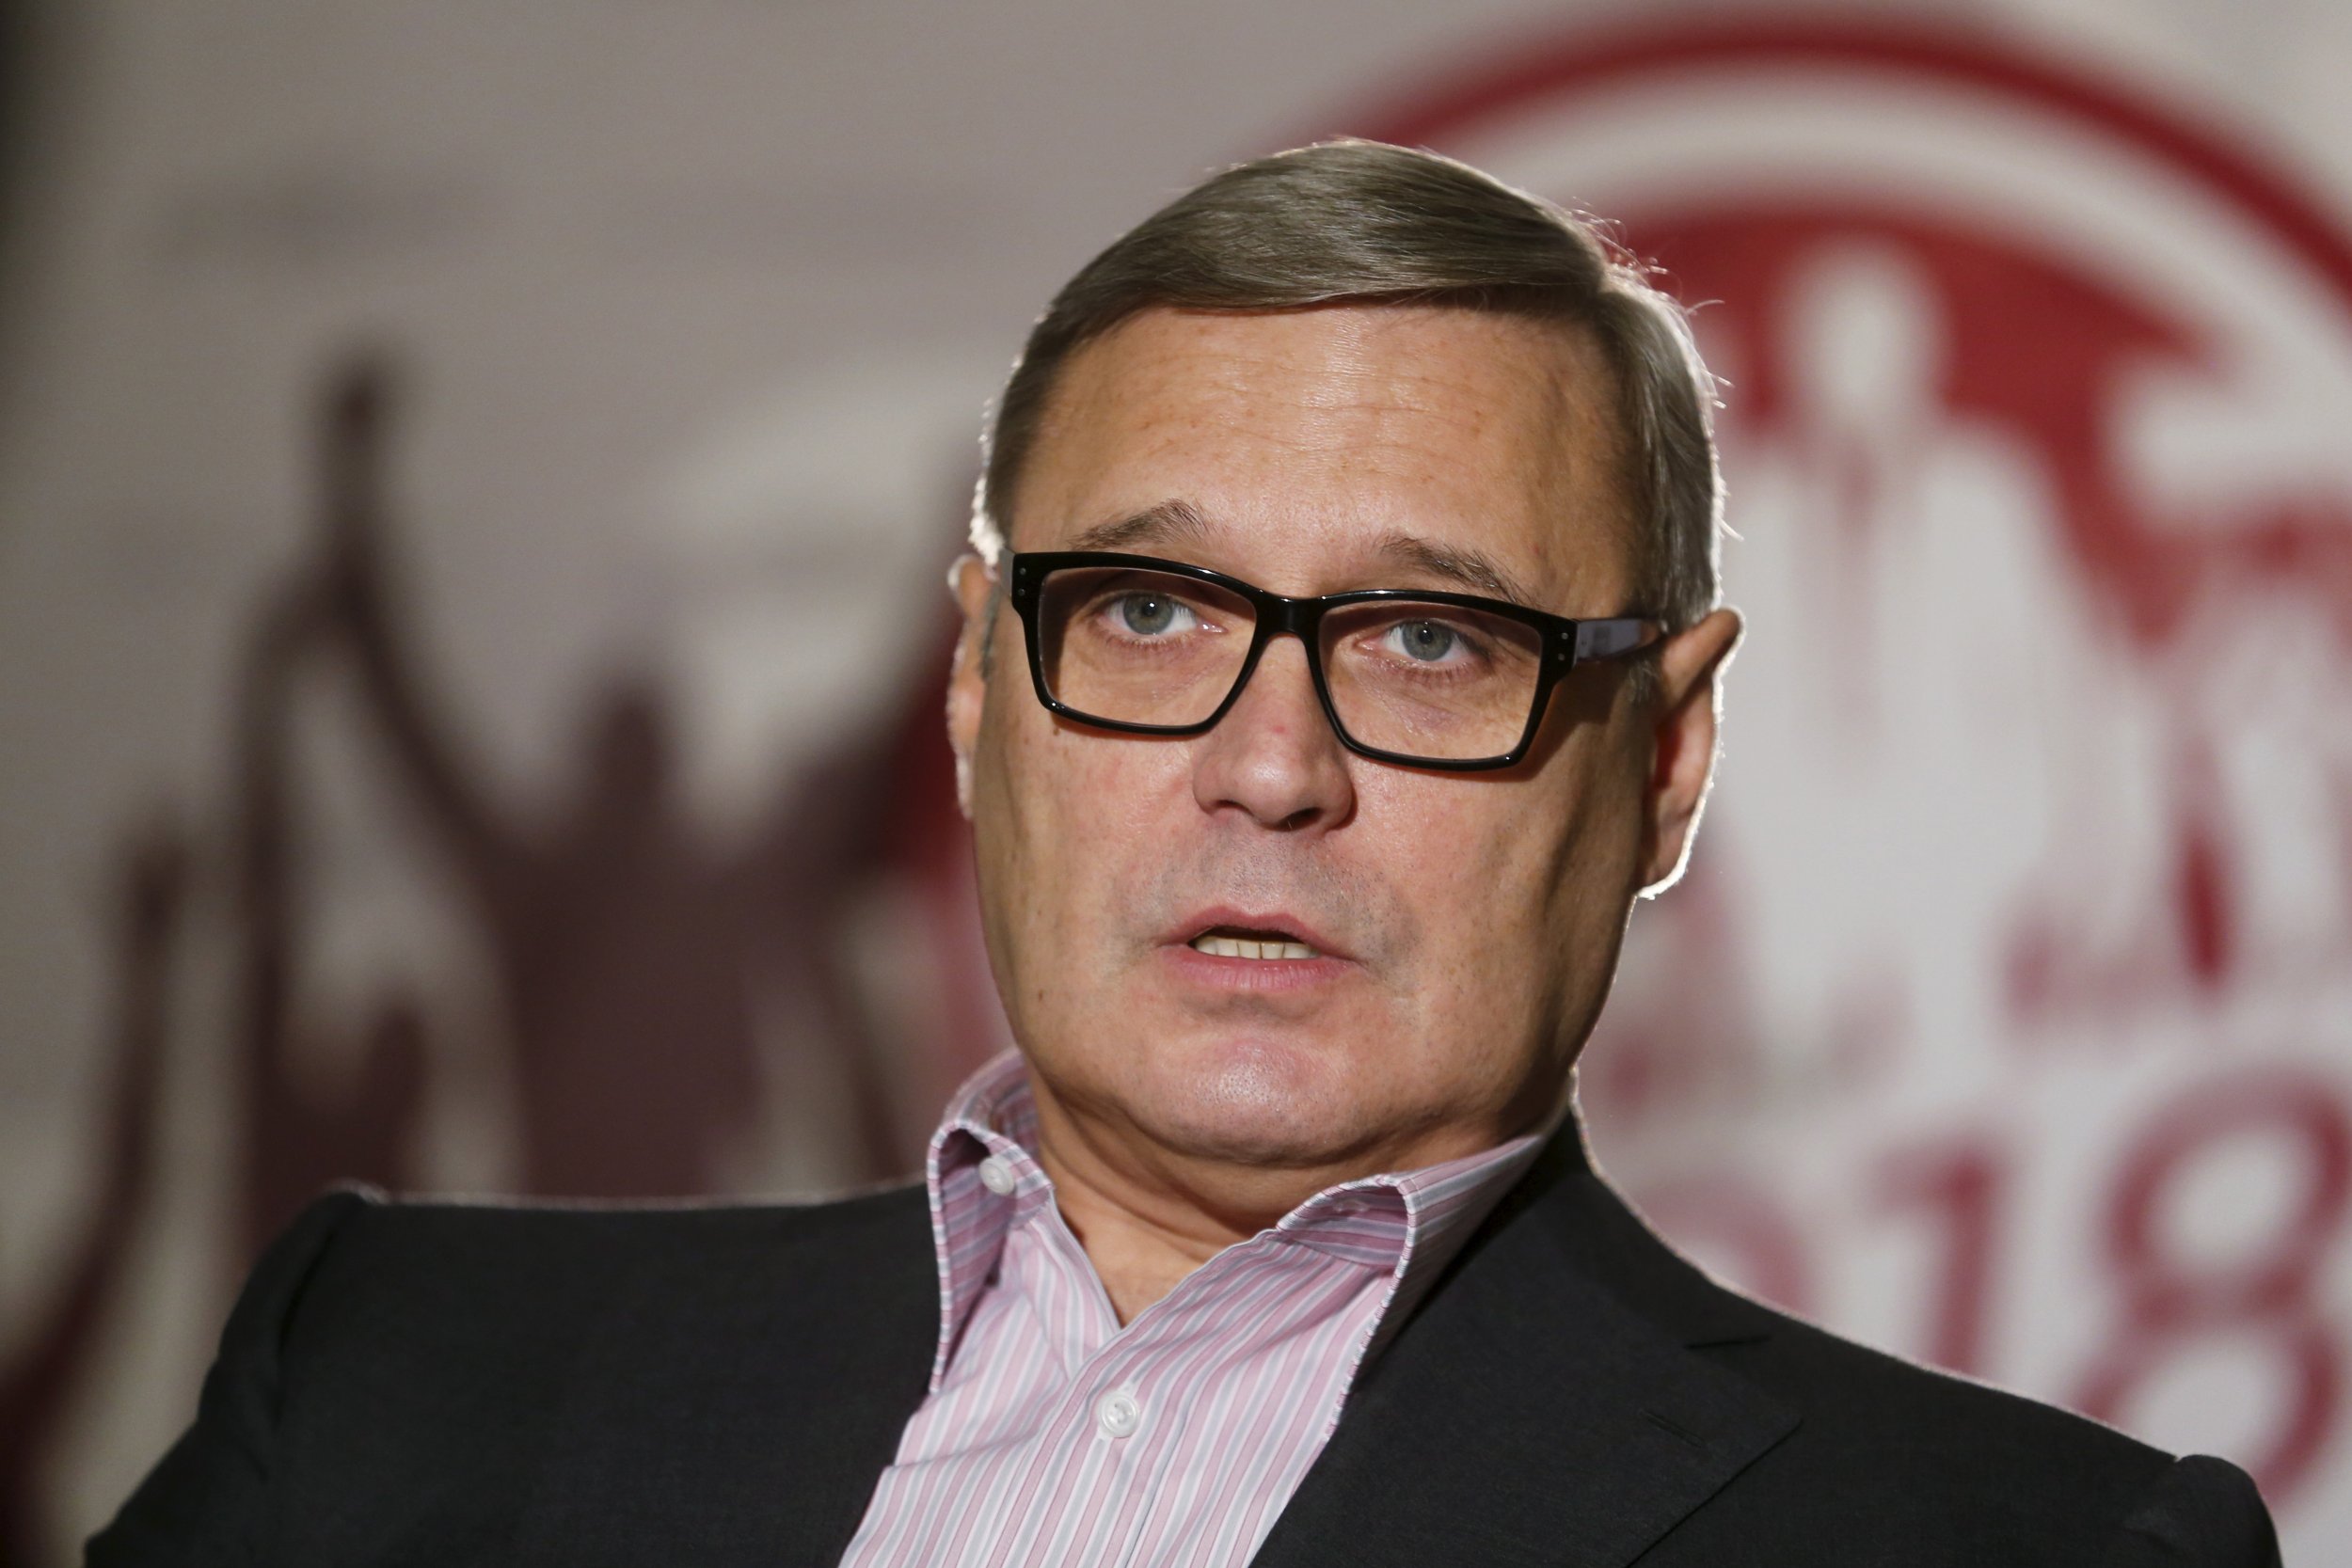 Kasyanov speaks in front of party banner